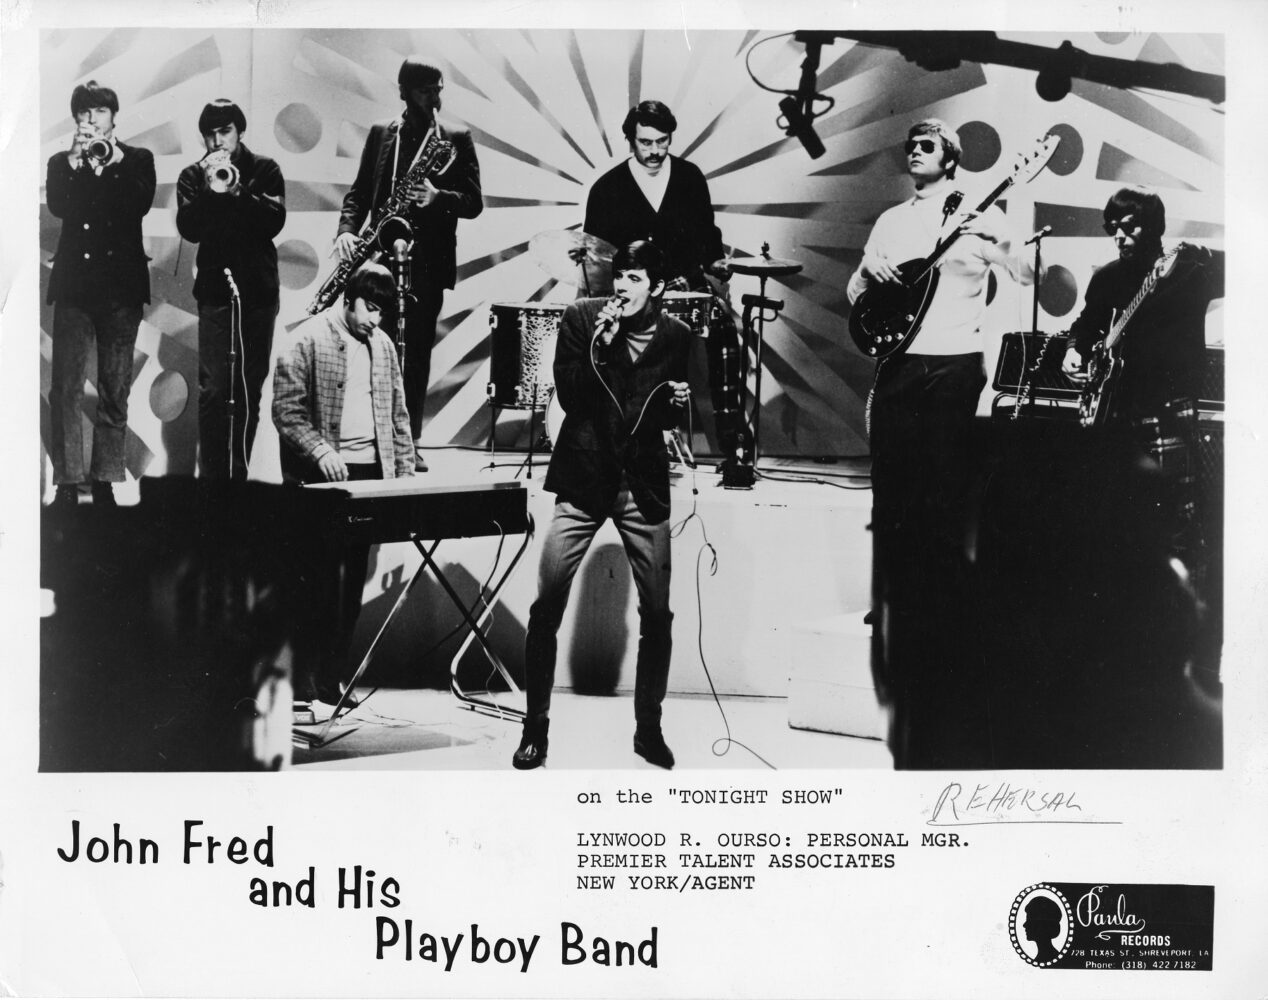 John Fred and His Playboy Band